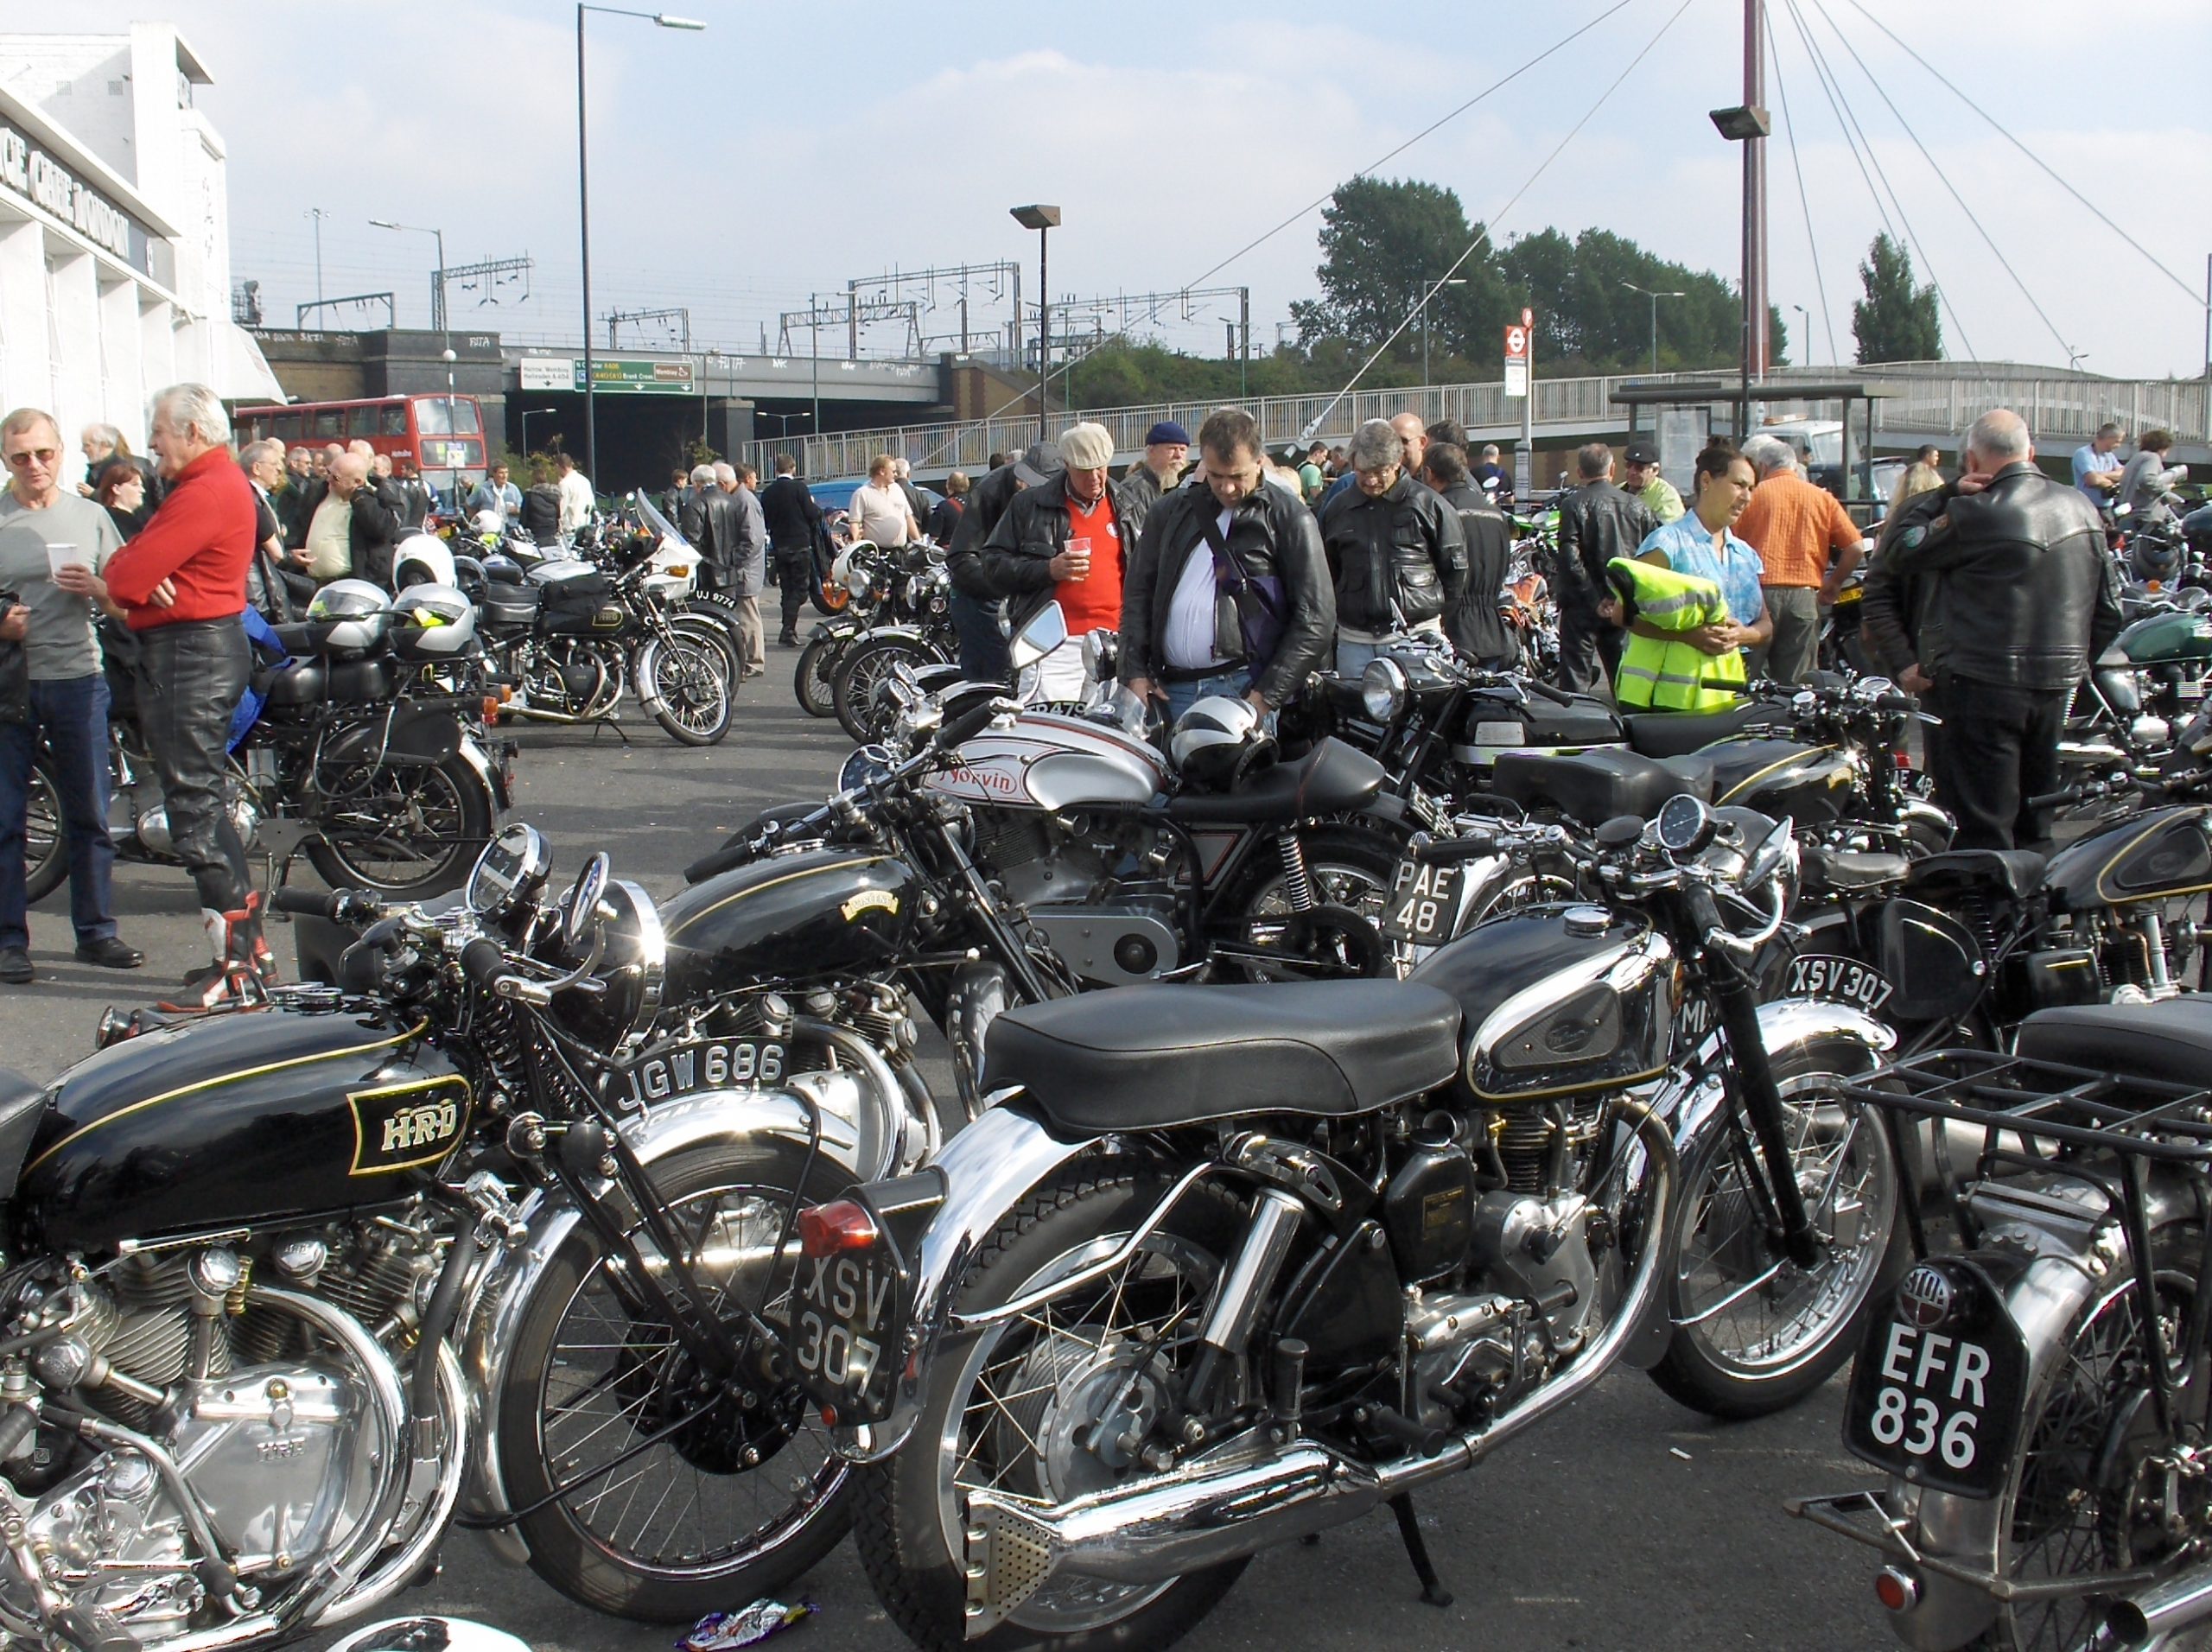 Brit 'v's & Classic Day At The Ace Cafe